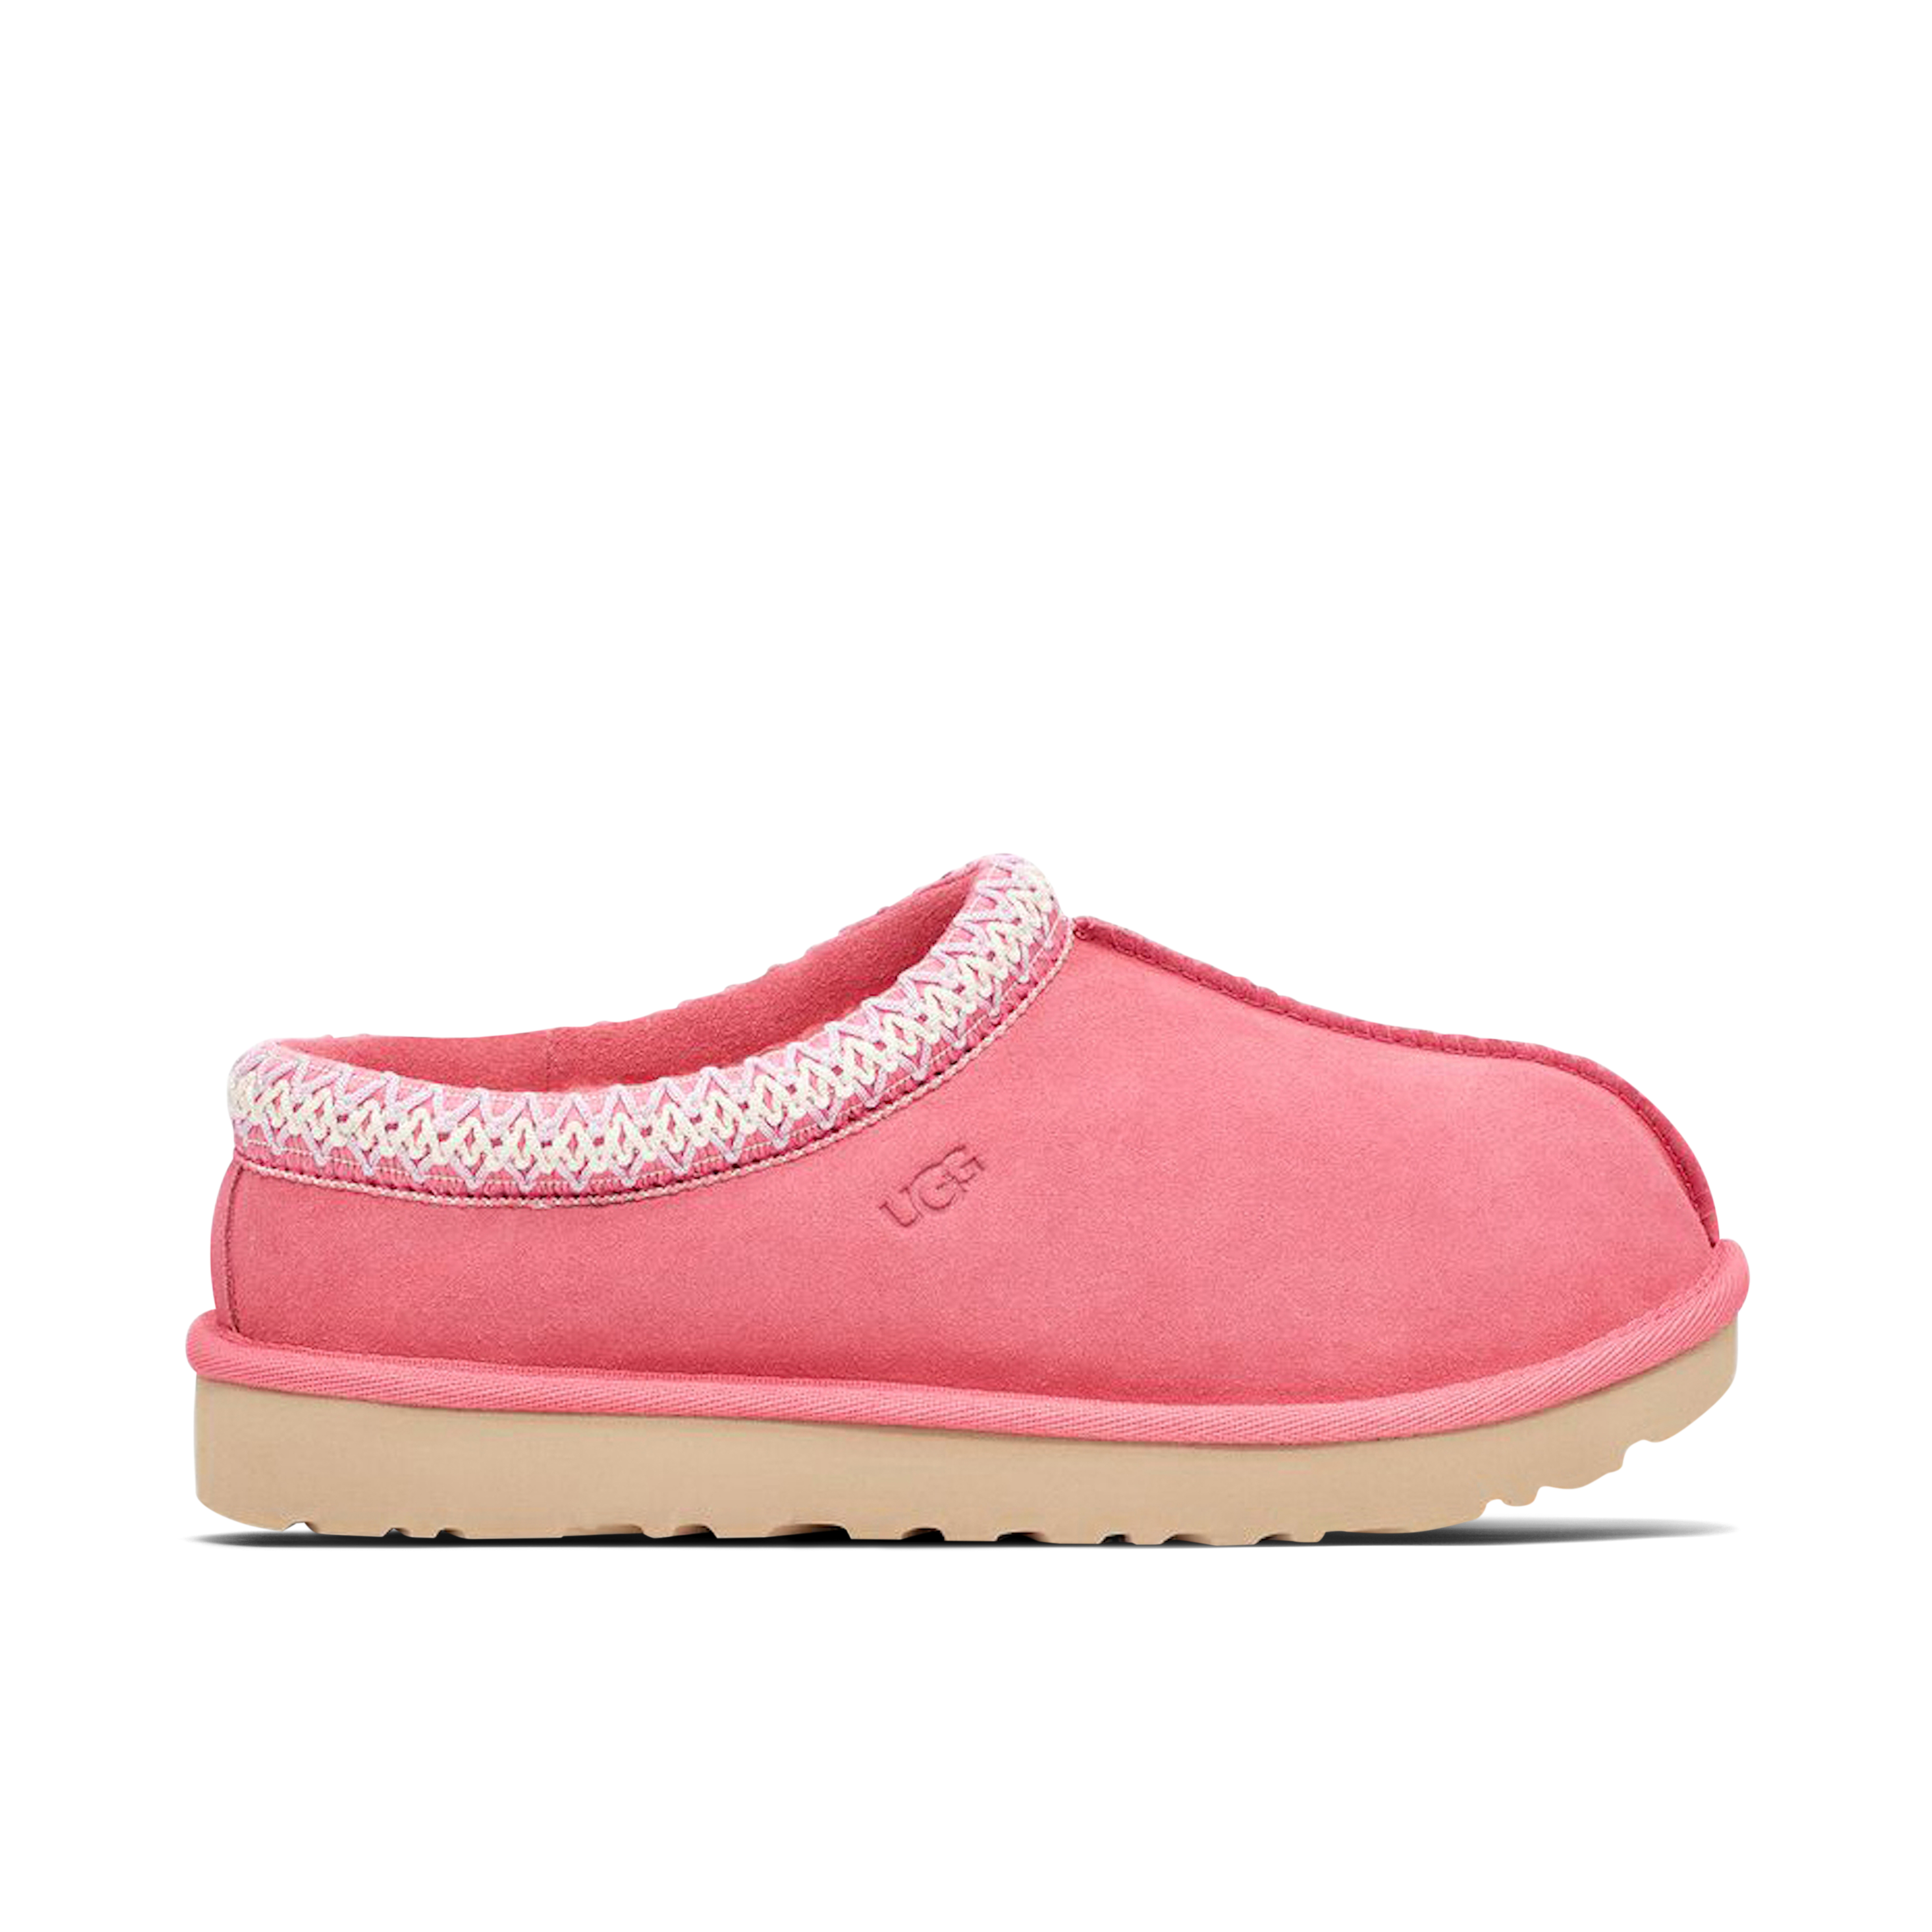 UGG Women's Scuffette Pink Crystal Suede Shearling Slippers